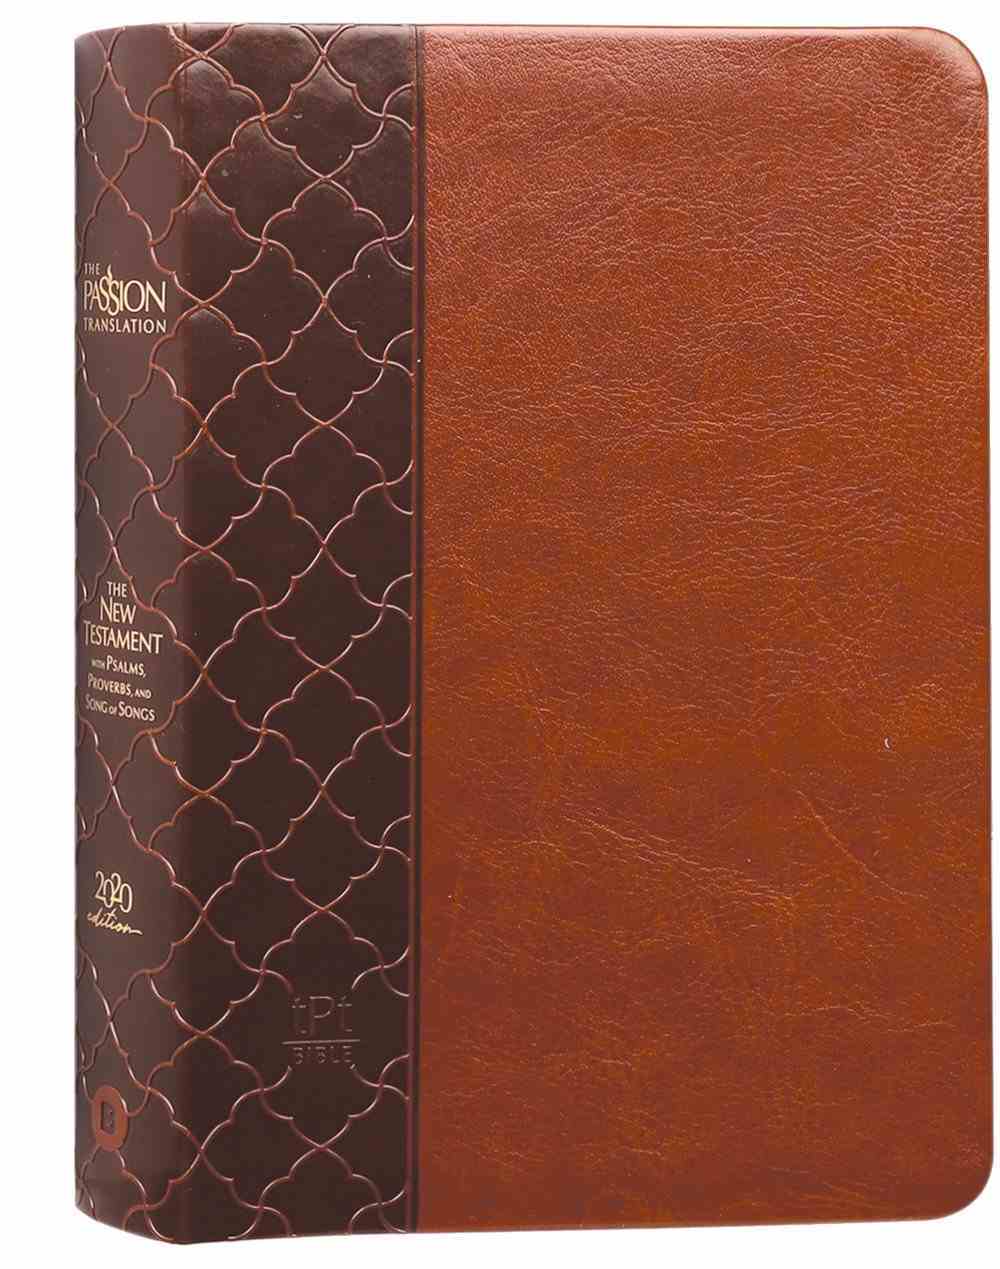 TPT New Testament Compact Brown (Black Letter Edition) (With Psalms, Proverbs And The Song Of Songs) Imitation Leather